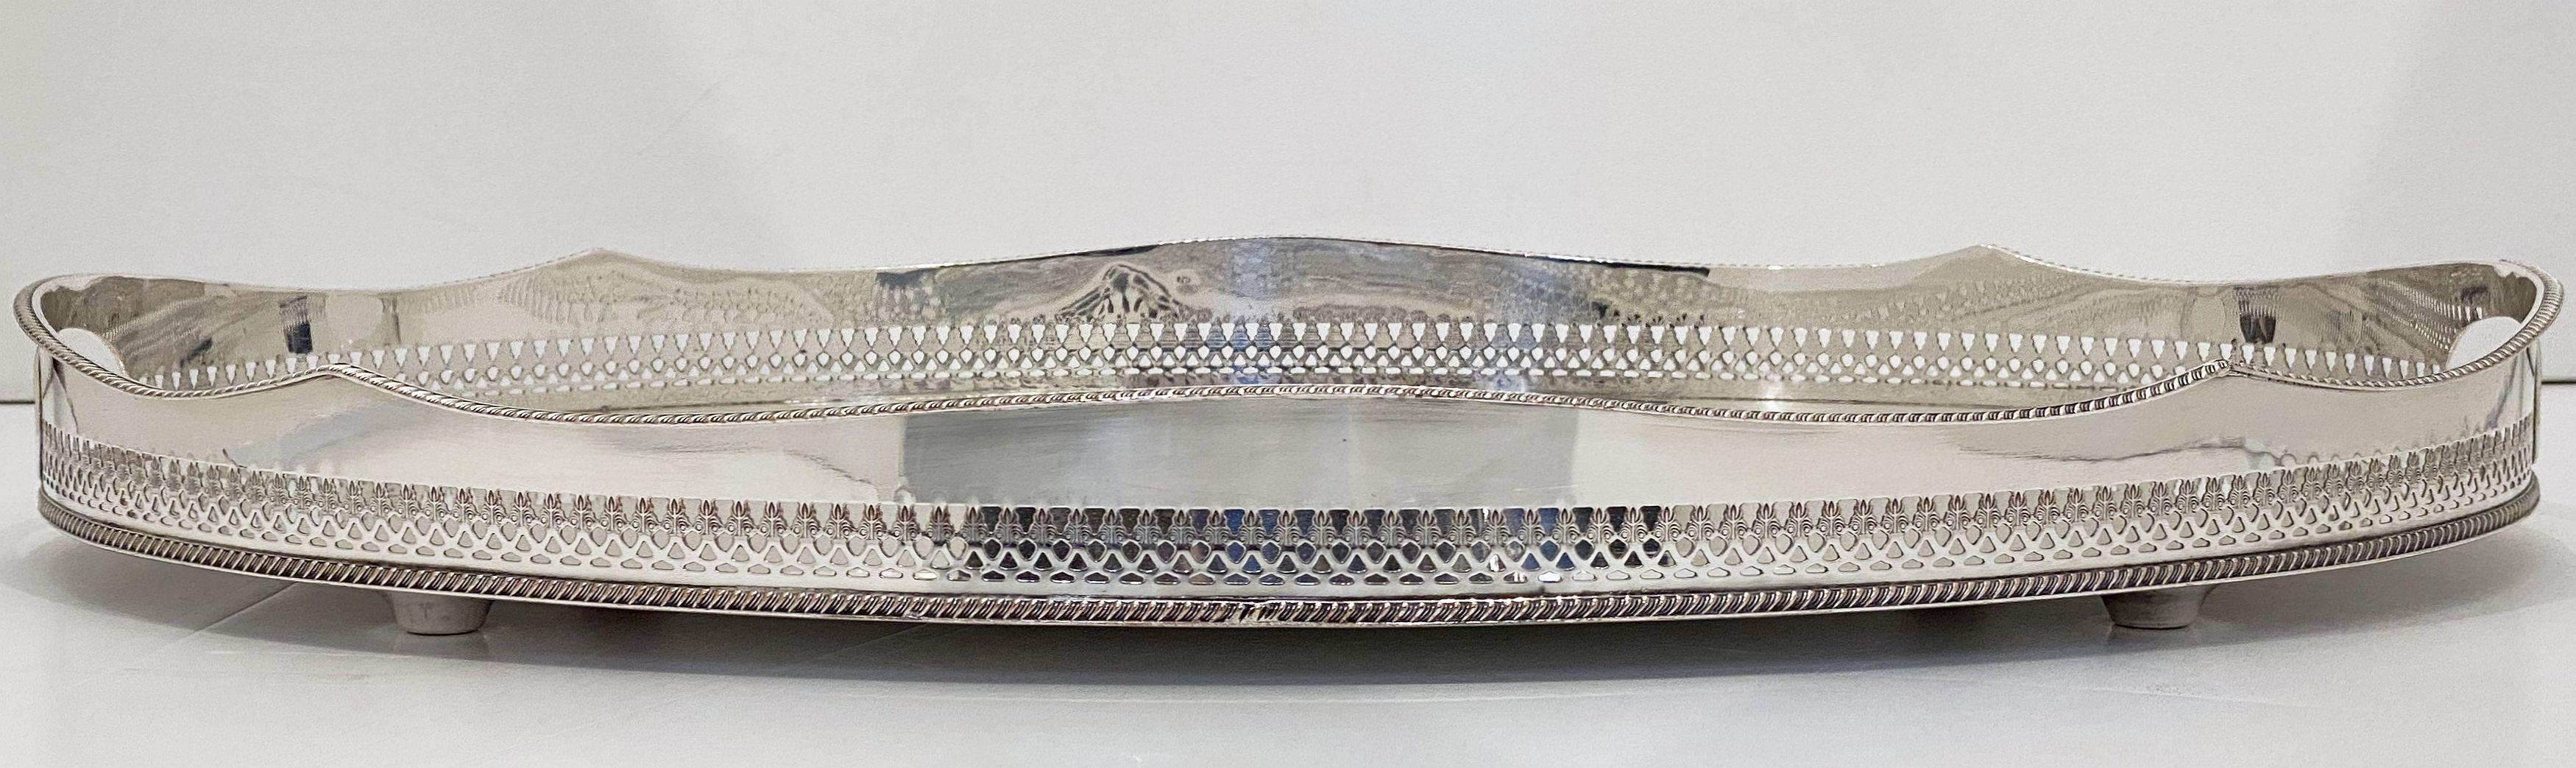 Metal Large English Silver Oval Gallery Serving or Drinks Tray